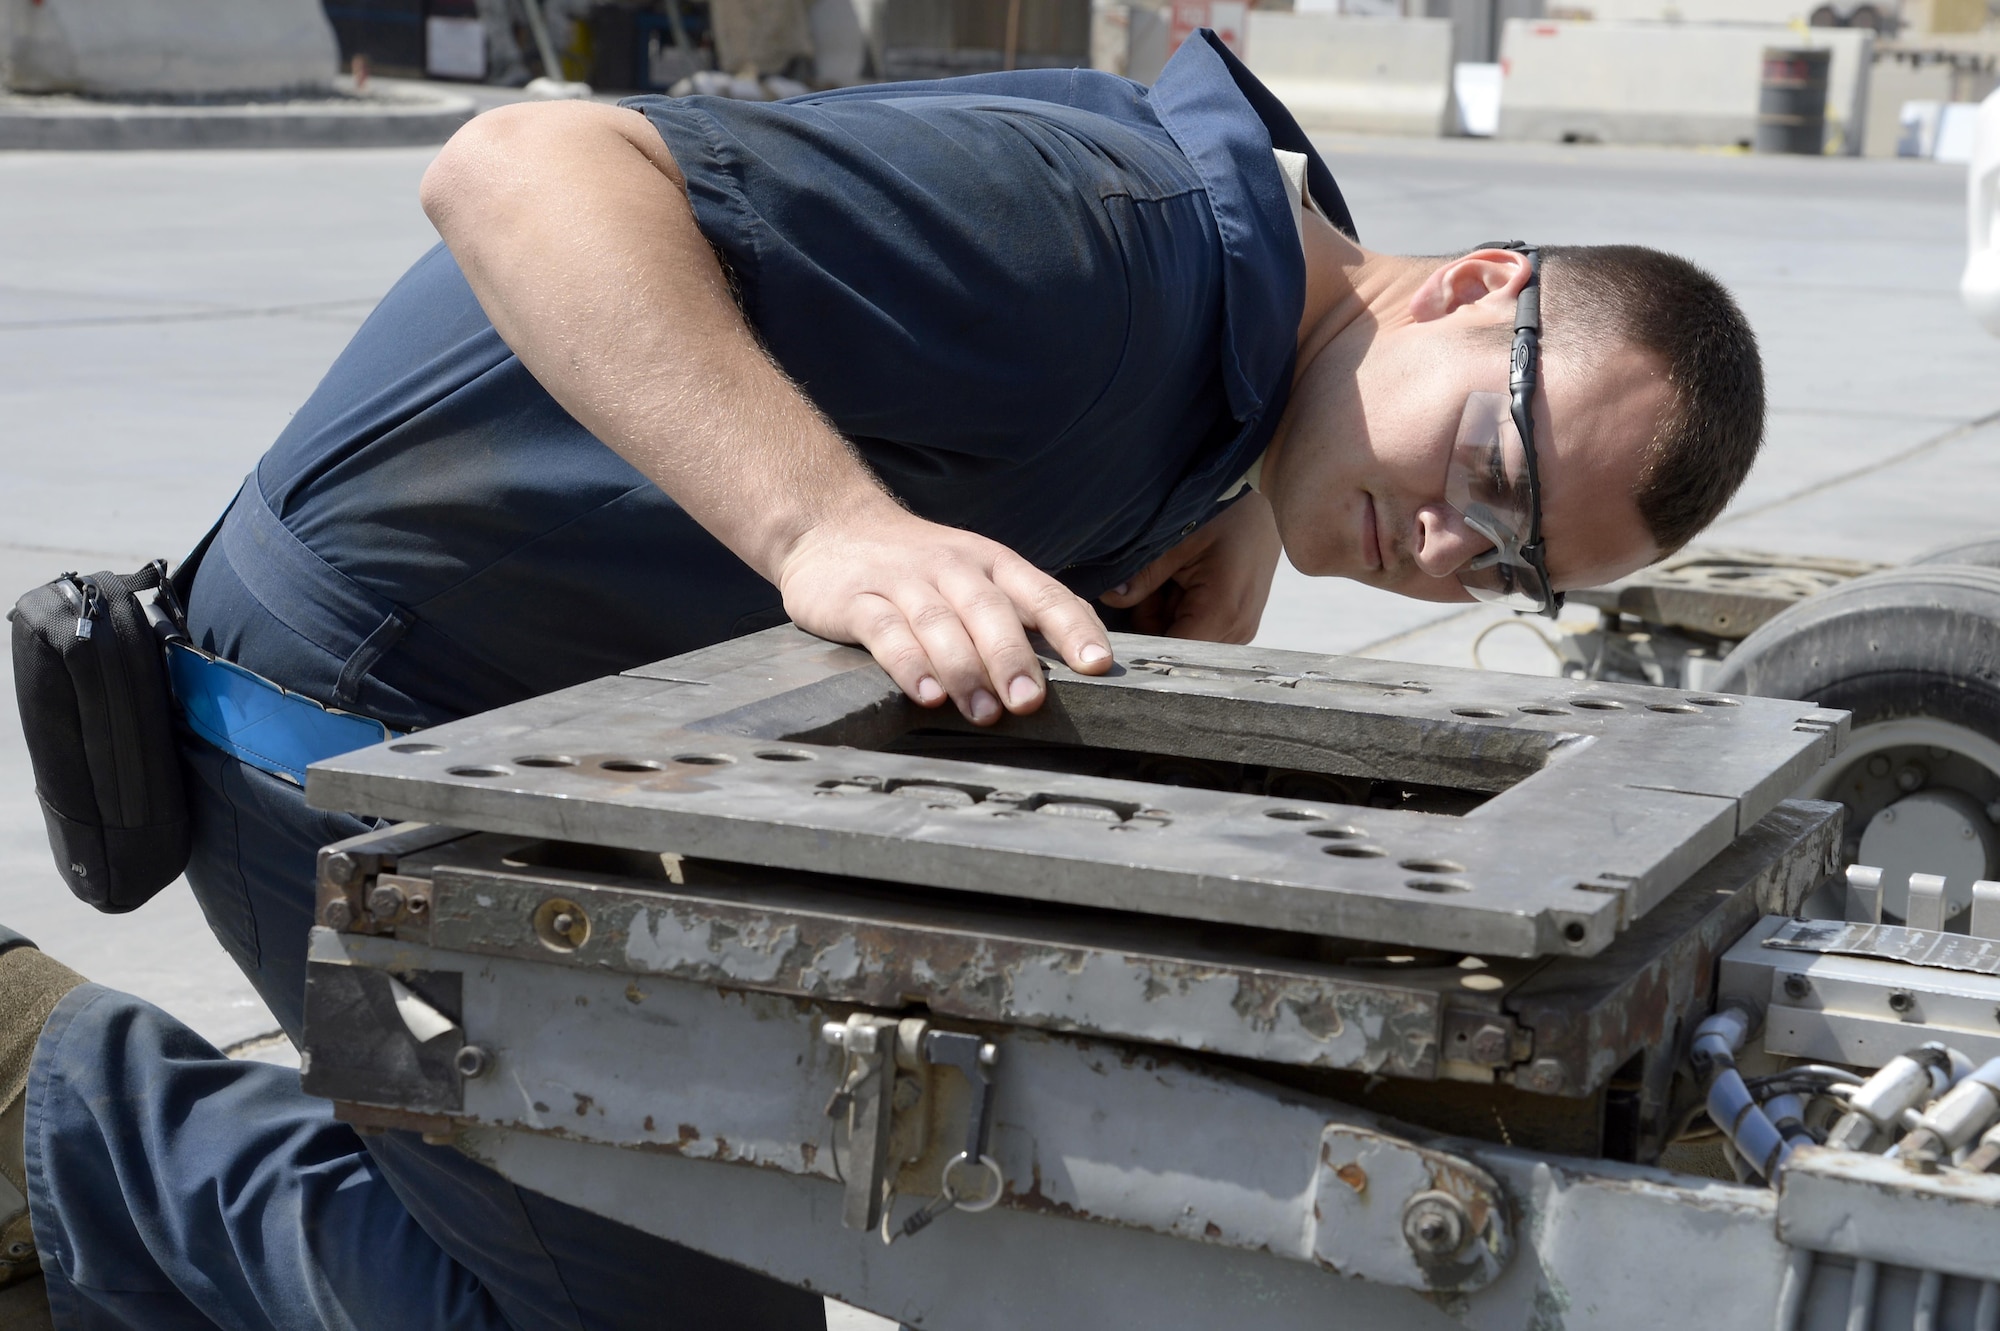 Senior Airman Michael, AGE journeyman, checks for a leak on a MJ-1B Jammer at an undisclosed location in Southwest Asia Mar. 3, 2015. AGE is comprised of Airmen from nine different air force bases and three major commands that work together to contribute to their overall mission. Michael is currently deployed from Hill Air Force Base, Utah and is a native of Burleson, Texas. (U.S. Air Force photo/Tech. Sgt. Marie Brown) (RELEASED)